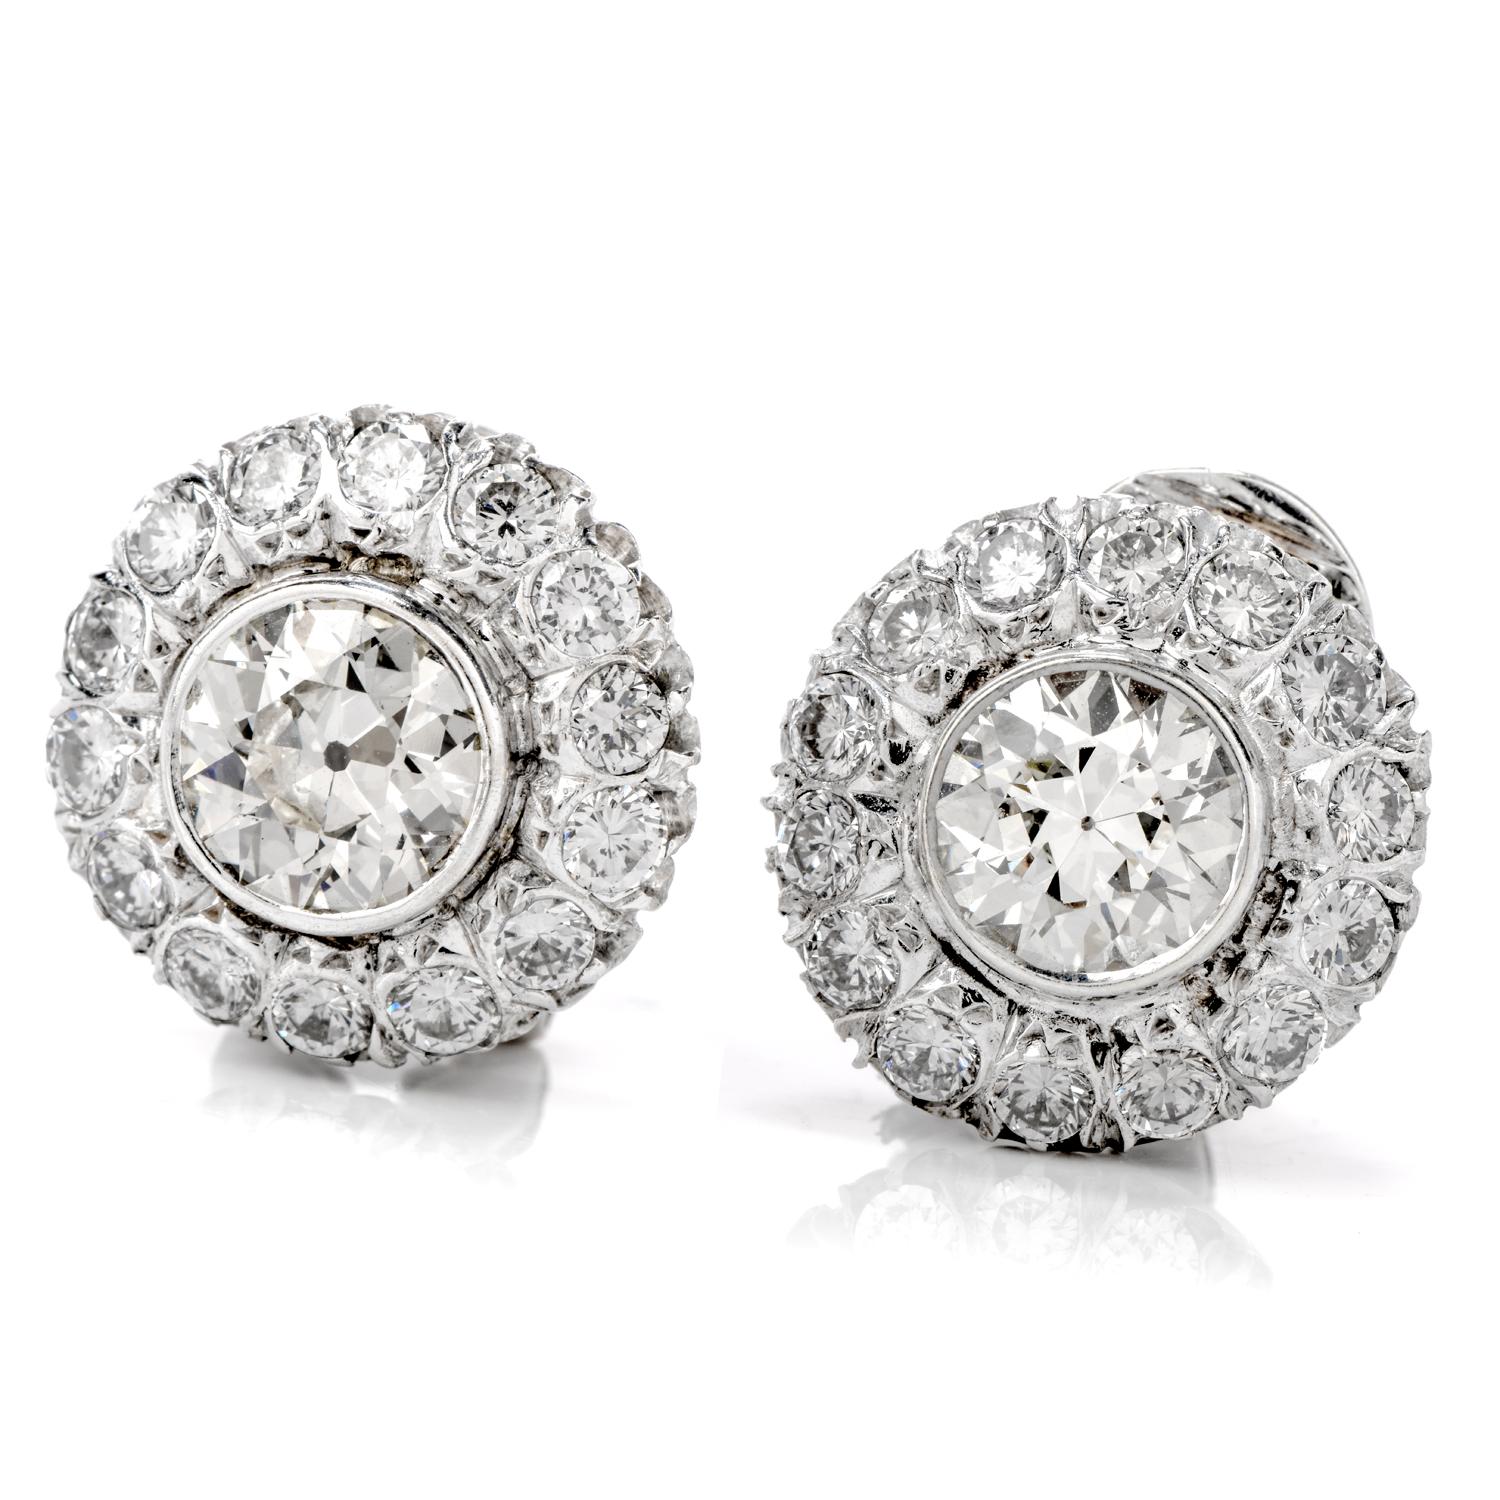 Feel high-class in these sophisticated Estate Diamond Platinum Old European Cut Halo Clip-On Earrings!  These

comfortable clip-on earrings host two impressive old European Cut diamonds of 2.60 total carats, I-J color and VS clarity. 

Twenty-eight